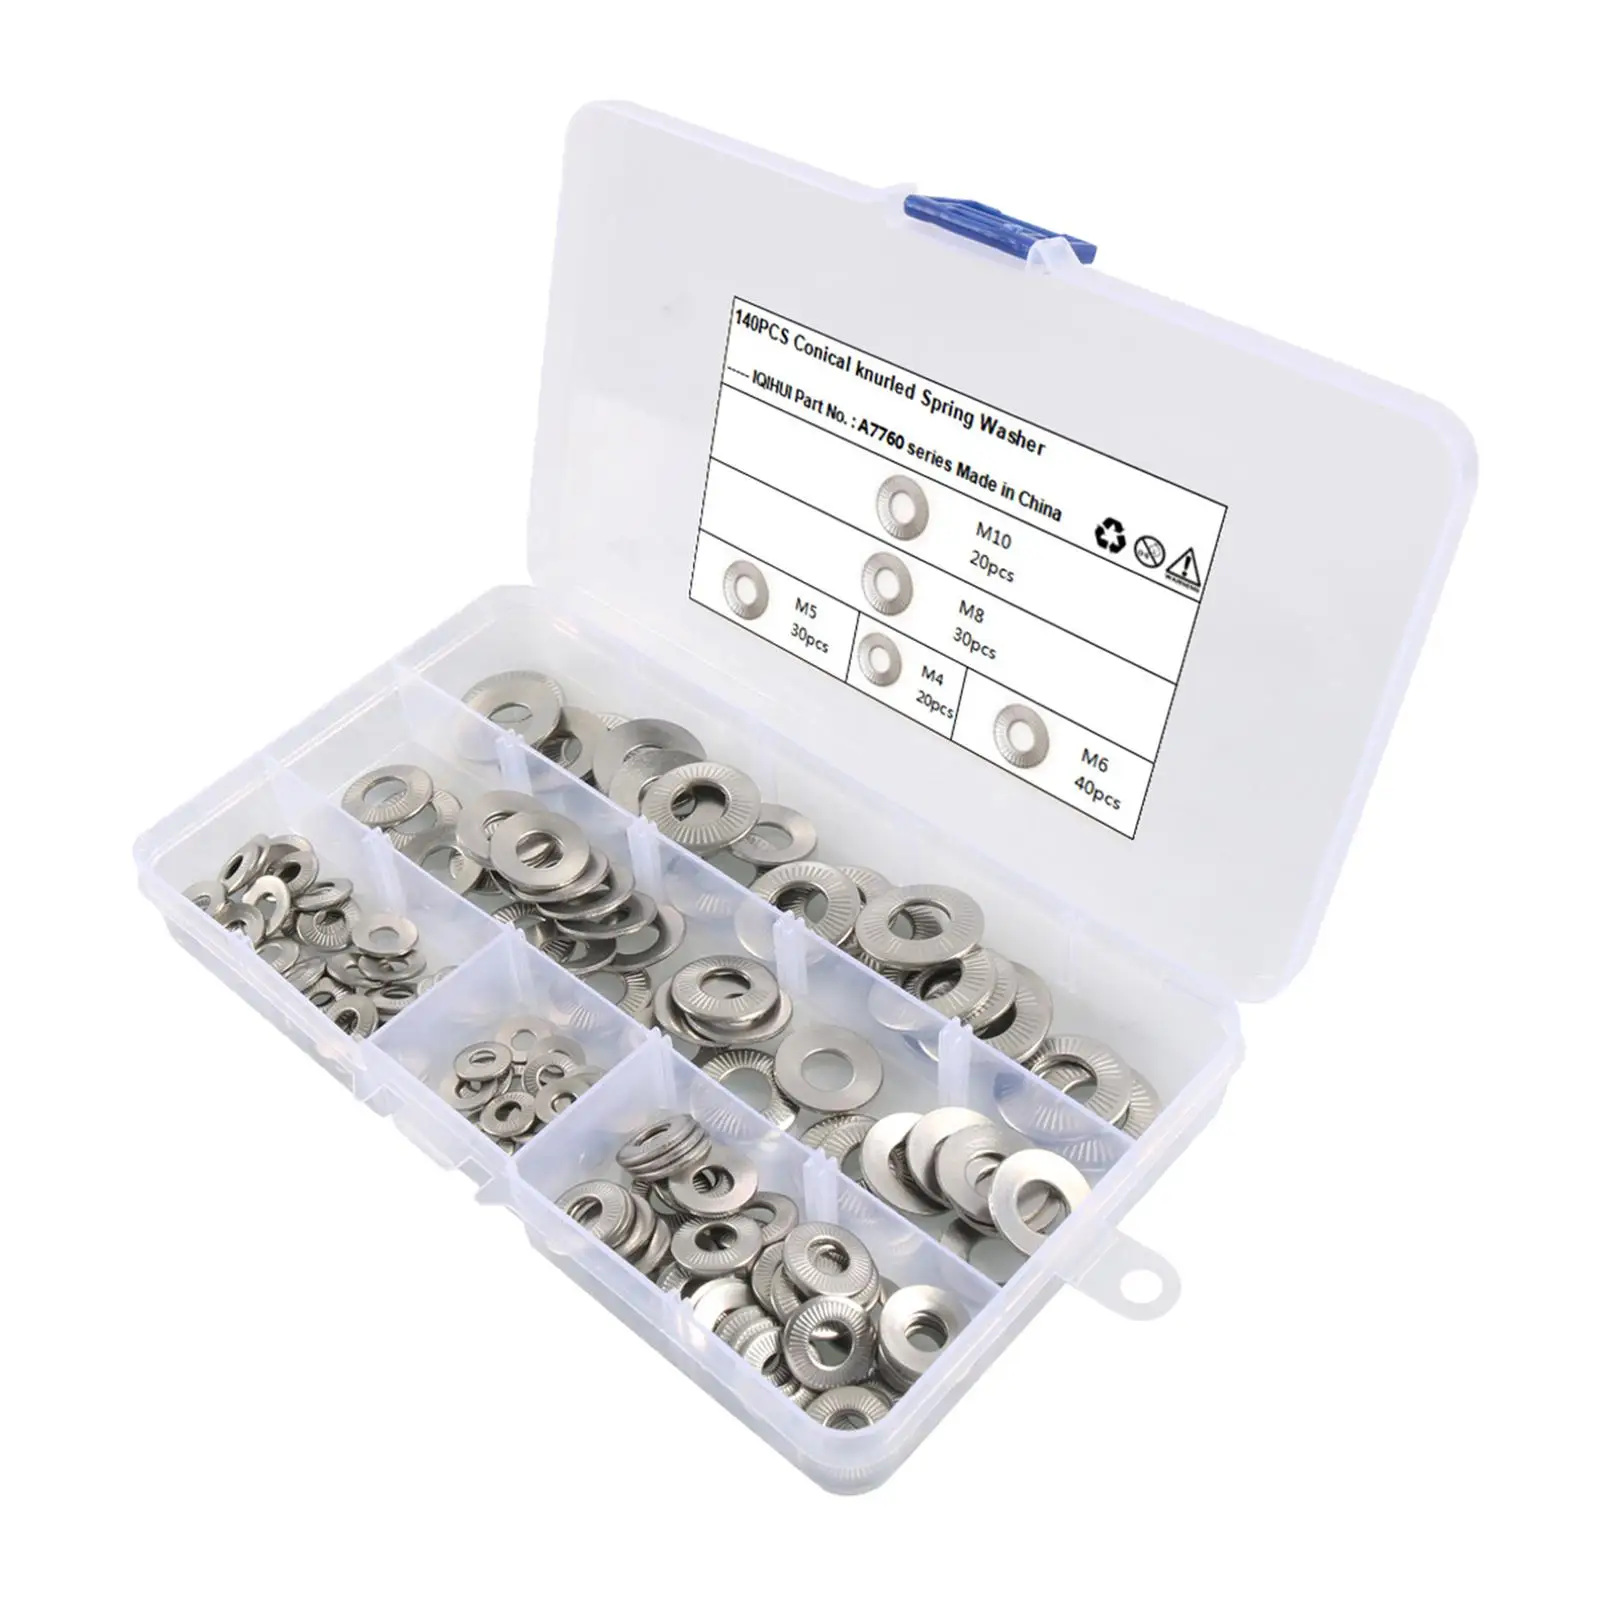 140 Pieces M4 M5 M6 M8 M10 Disc Spring Serrated Lock Washer with Case for Construction